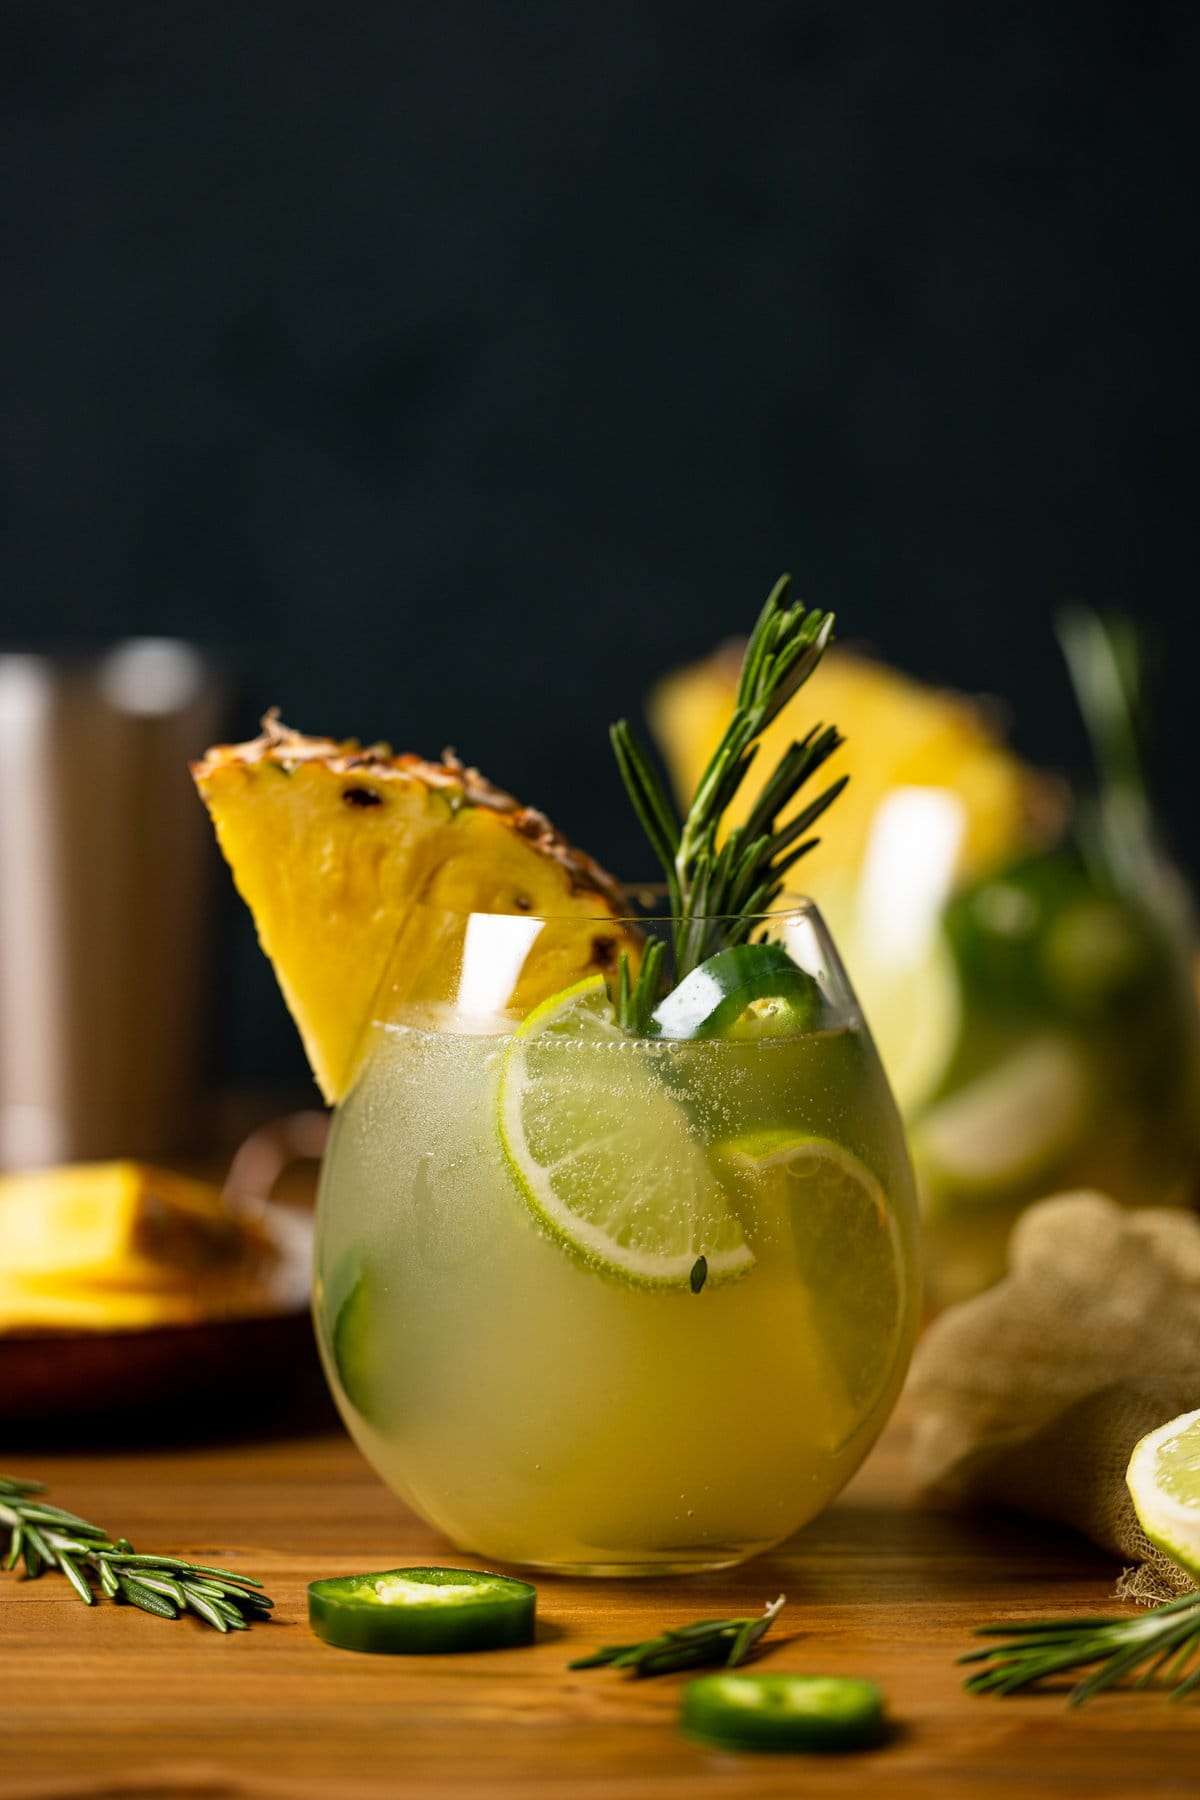 Pineapple Jalapeño Lime Mocktail with lime wedges, a pineapple slice, and a sprig of rosemary